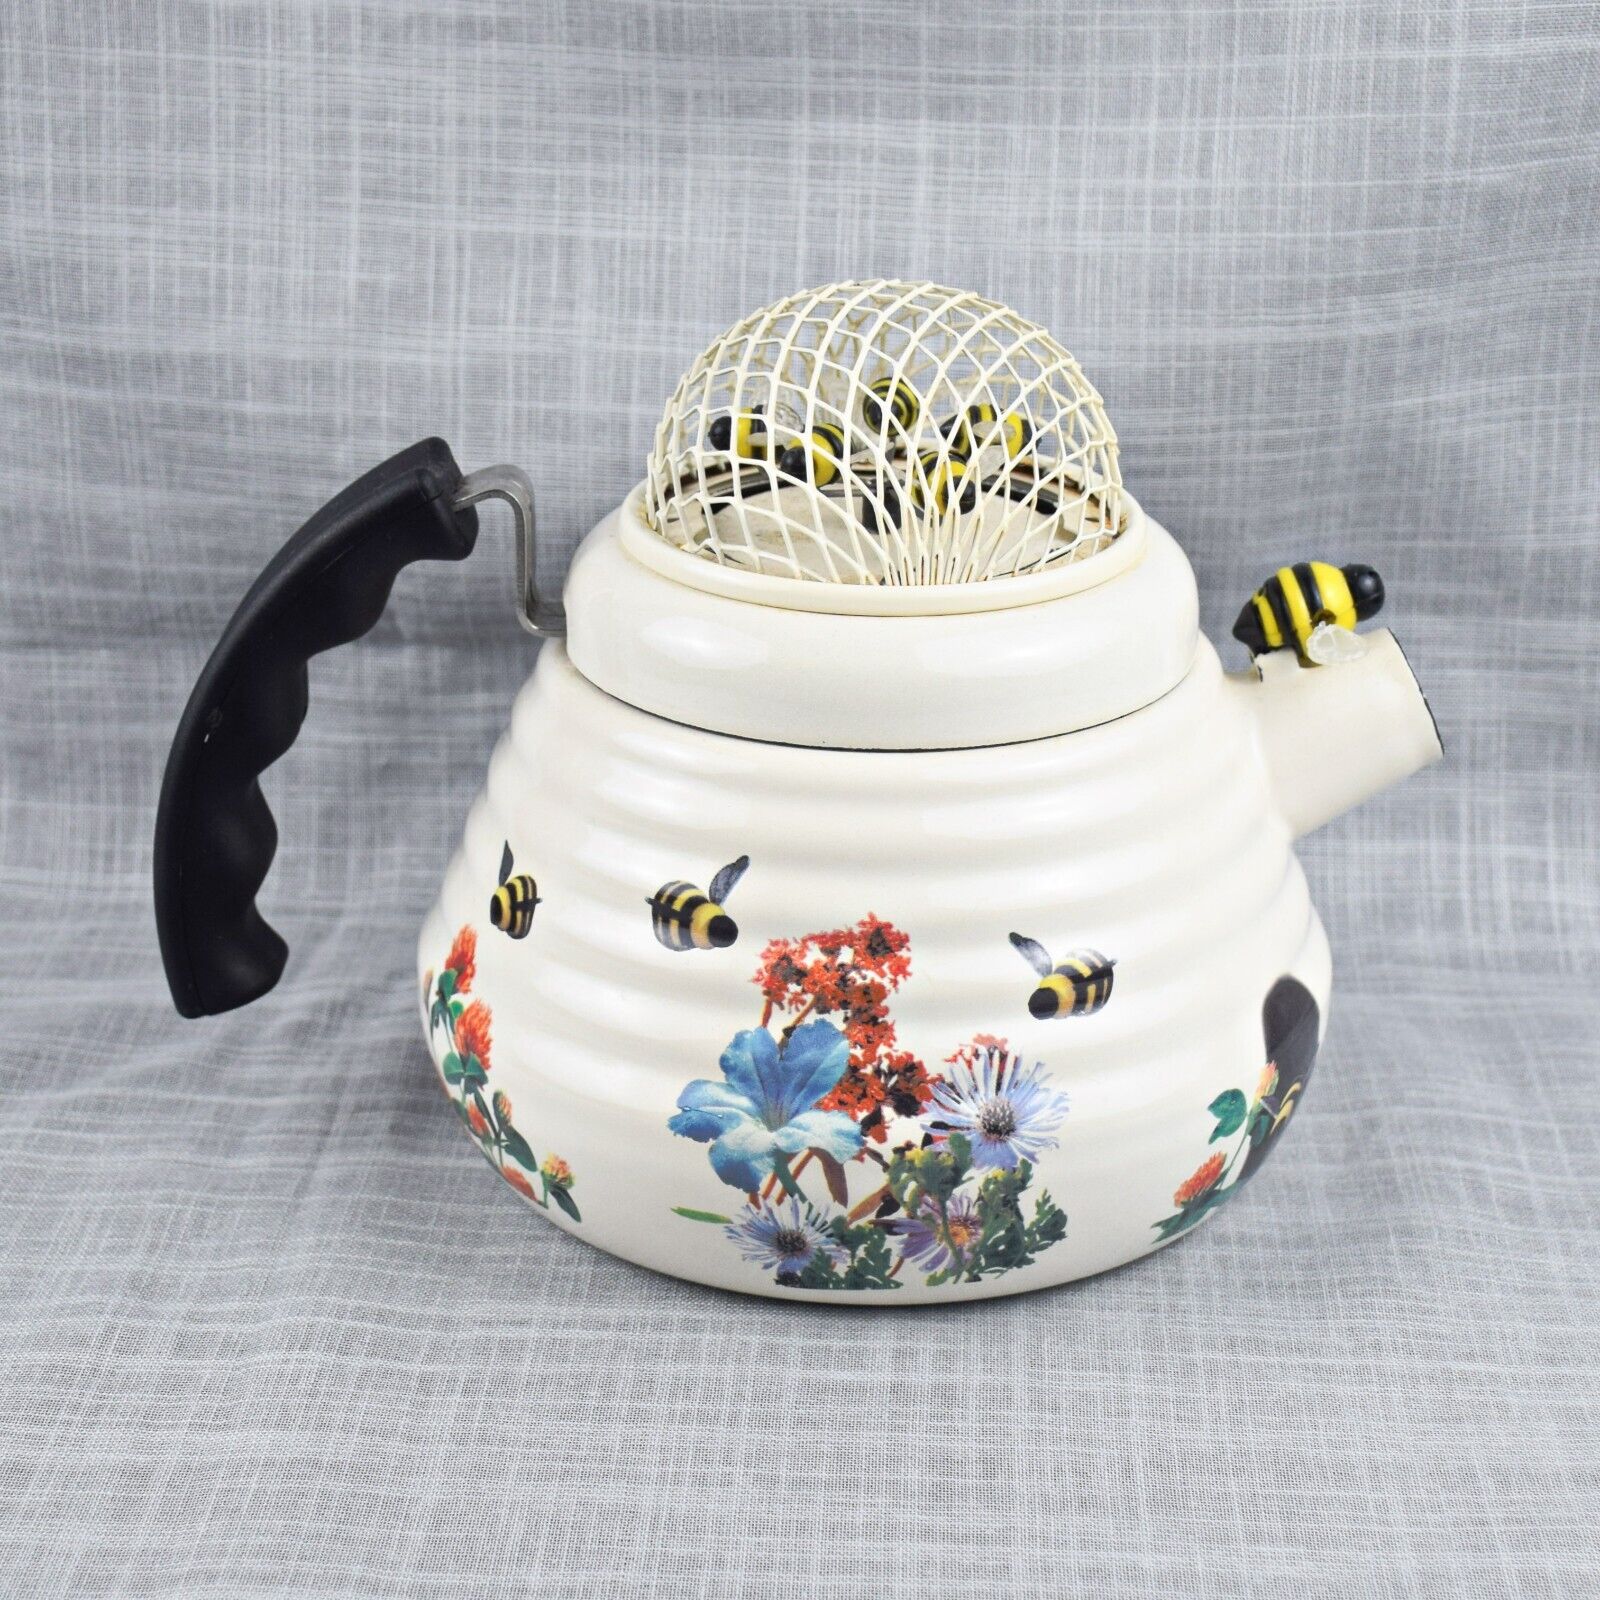 Rare MM KAMENSTEIN World of Motion Bumble Bee Hive (Tea) Kettle w/ spinning bees